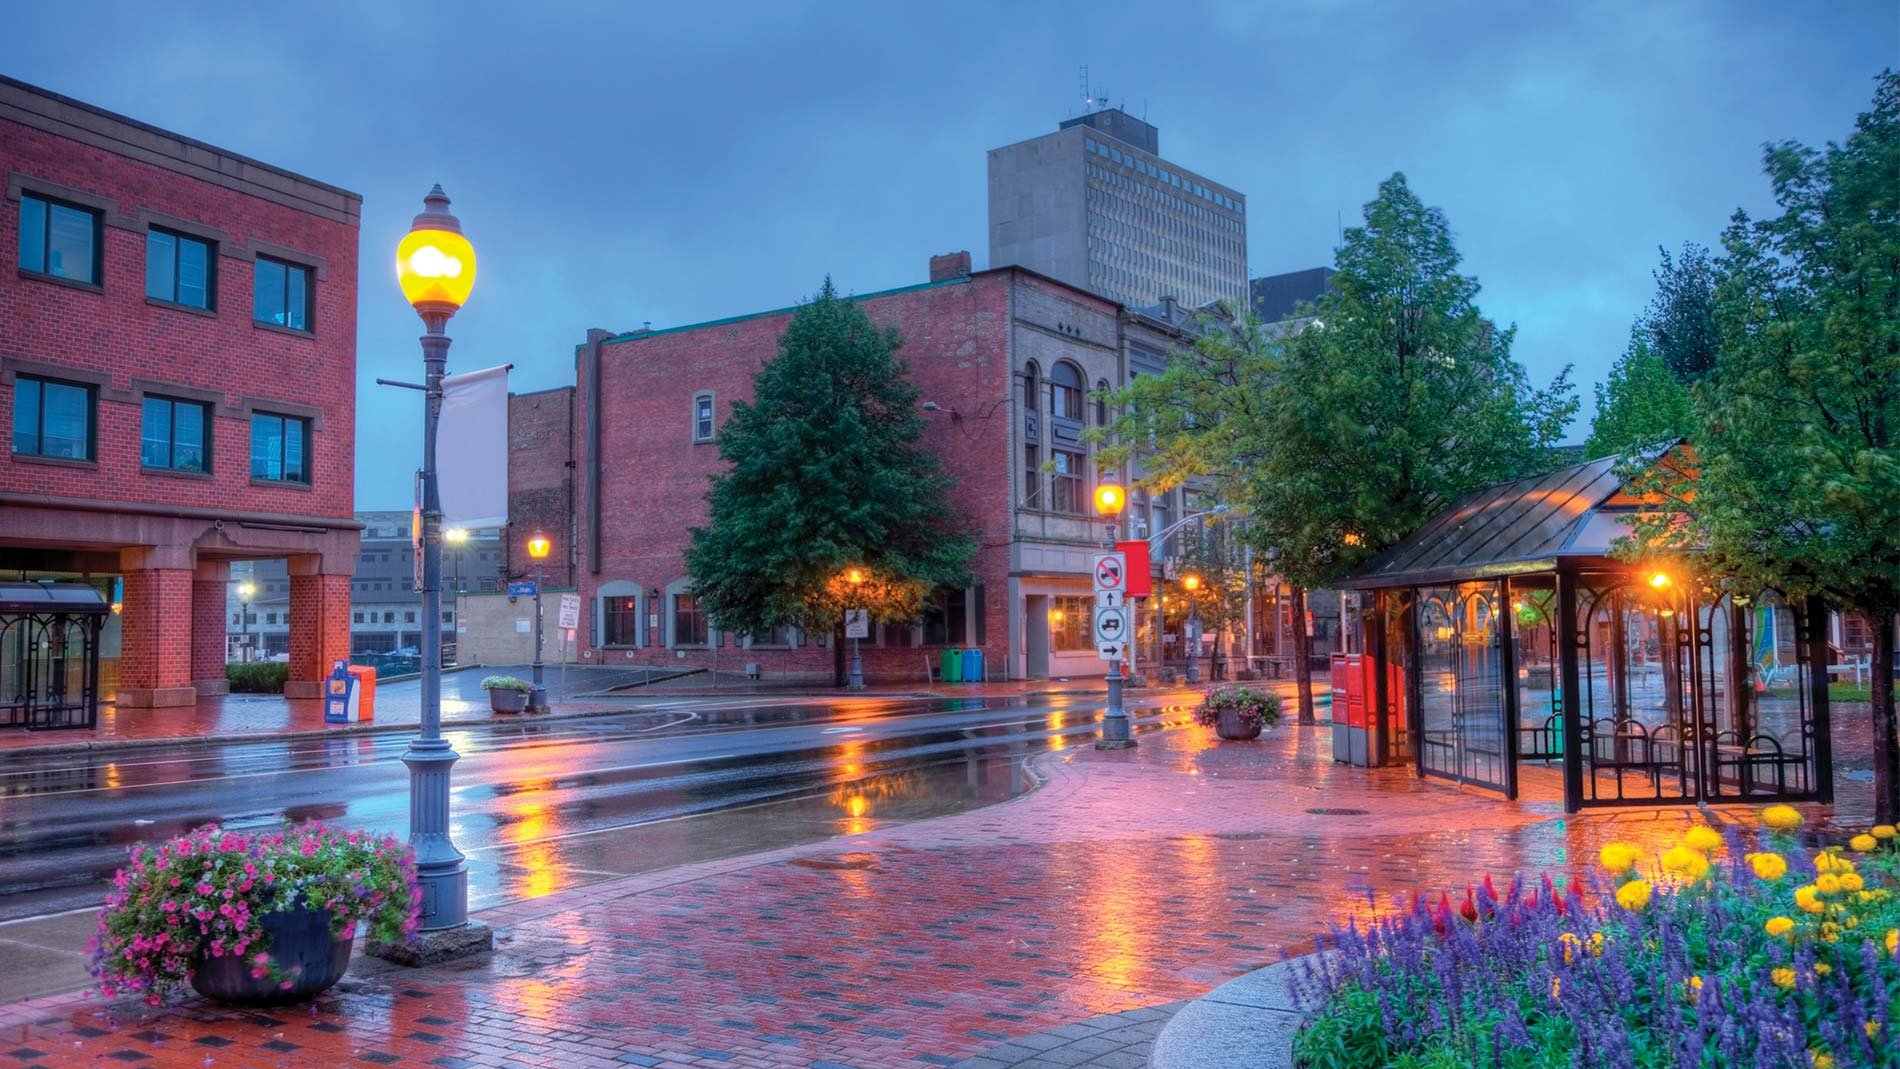 Rainy evening view of a street in Moncton, New Brunswick.